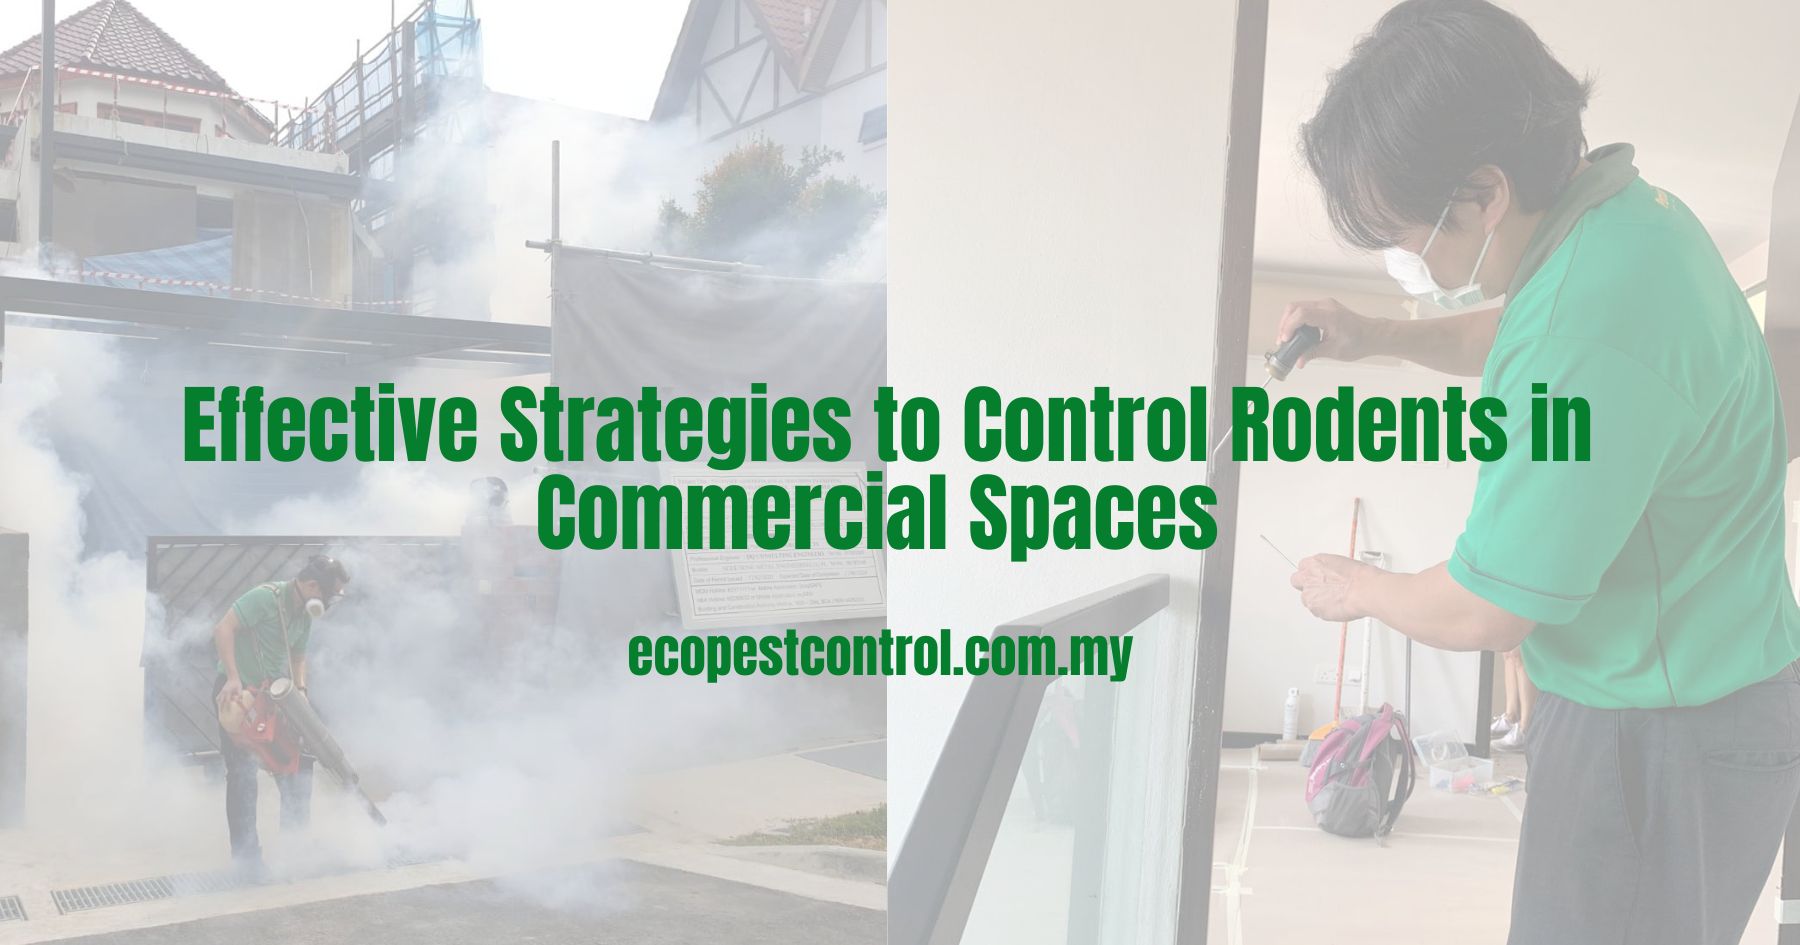 Effective Strategies to Control Rodents in Commercial Spaces